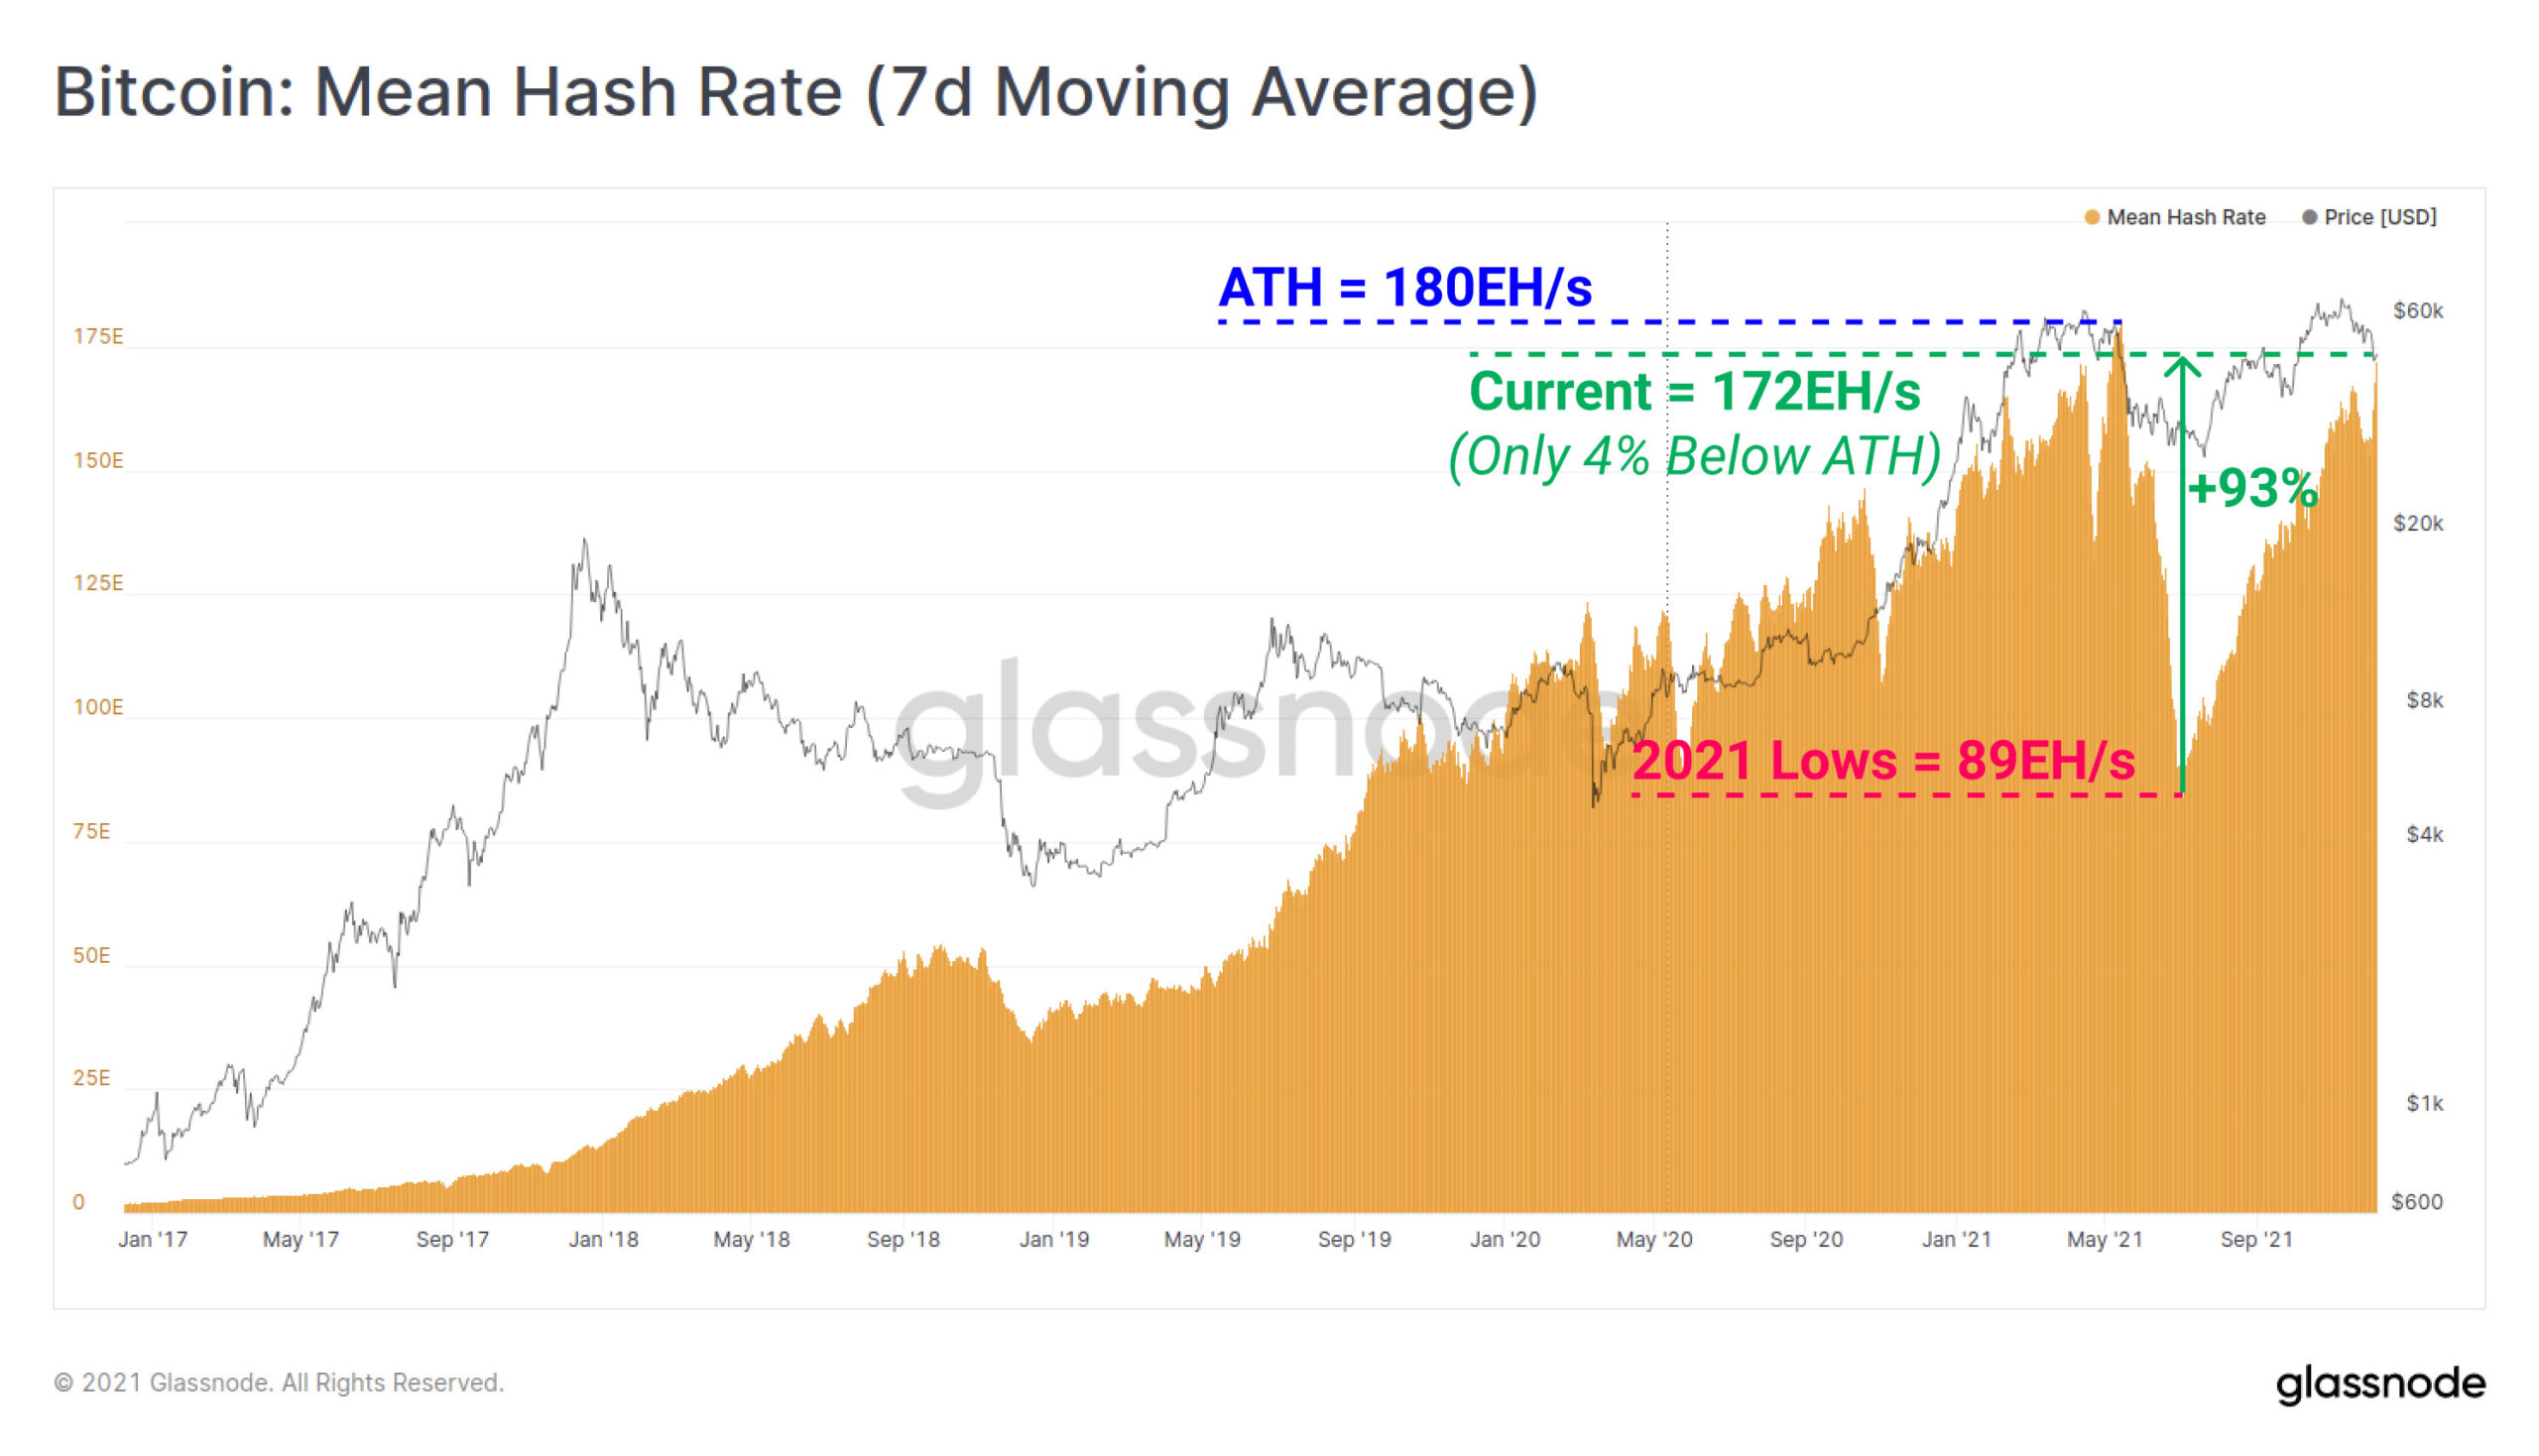 Bitcoin Hash Rate Almost Fully Recovered, Closes in on All-Time High